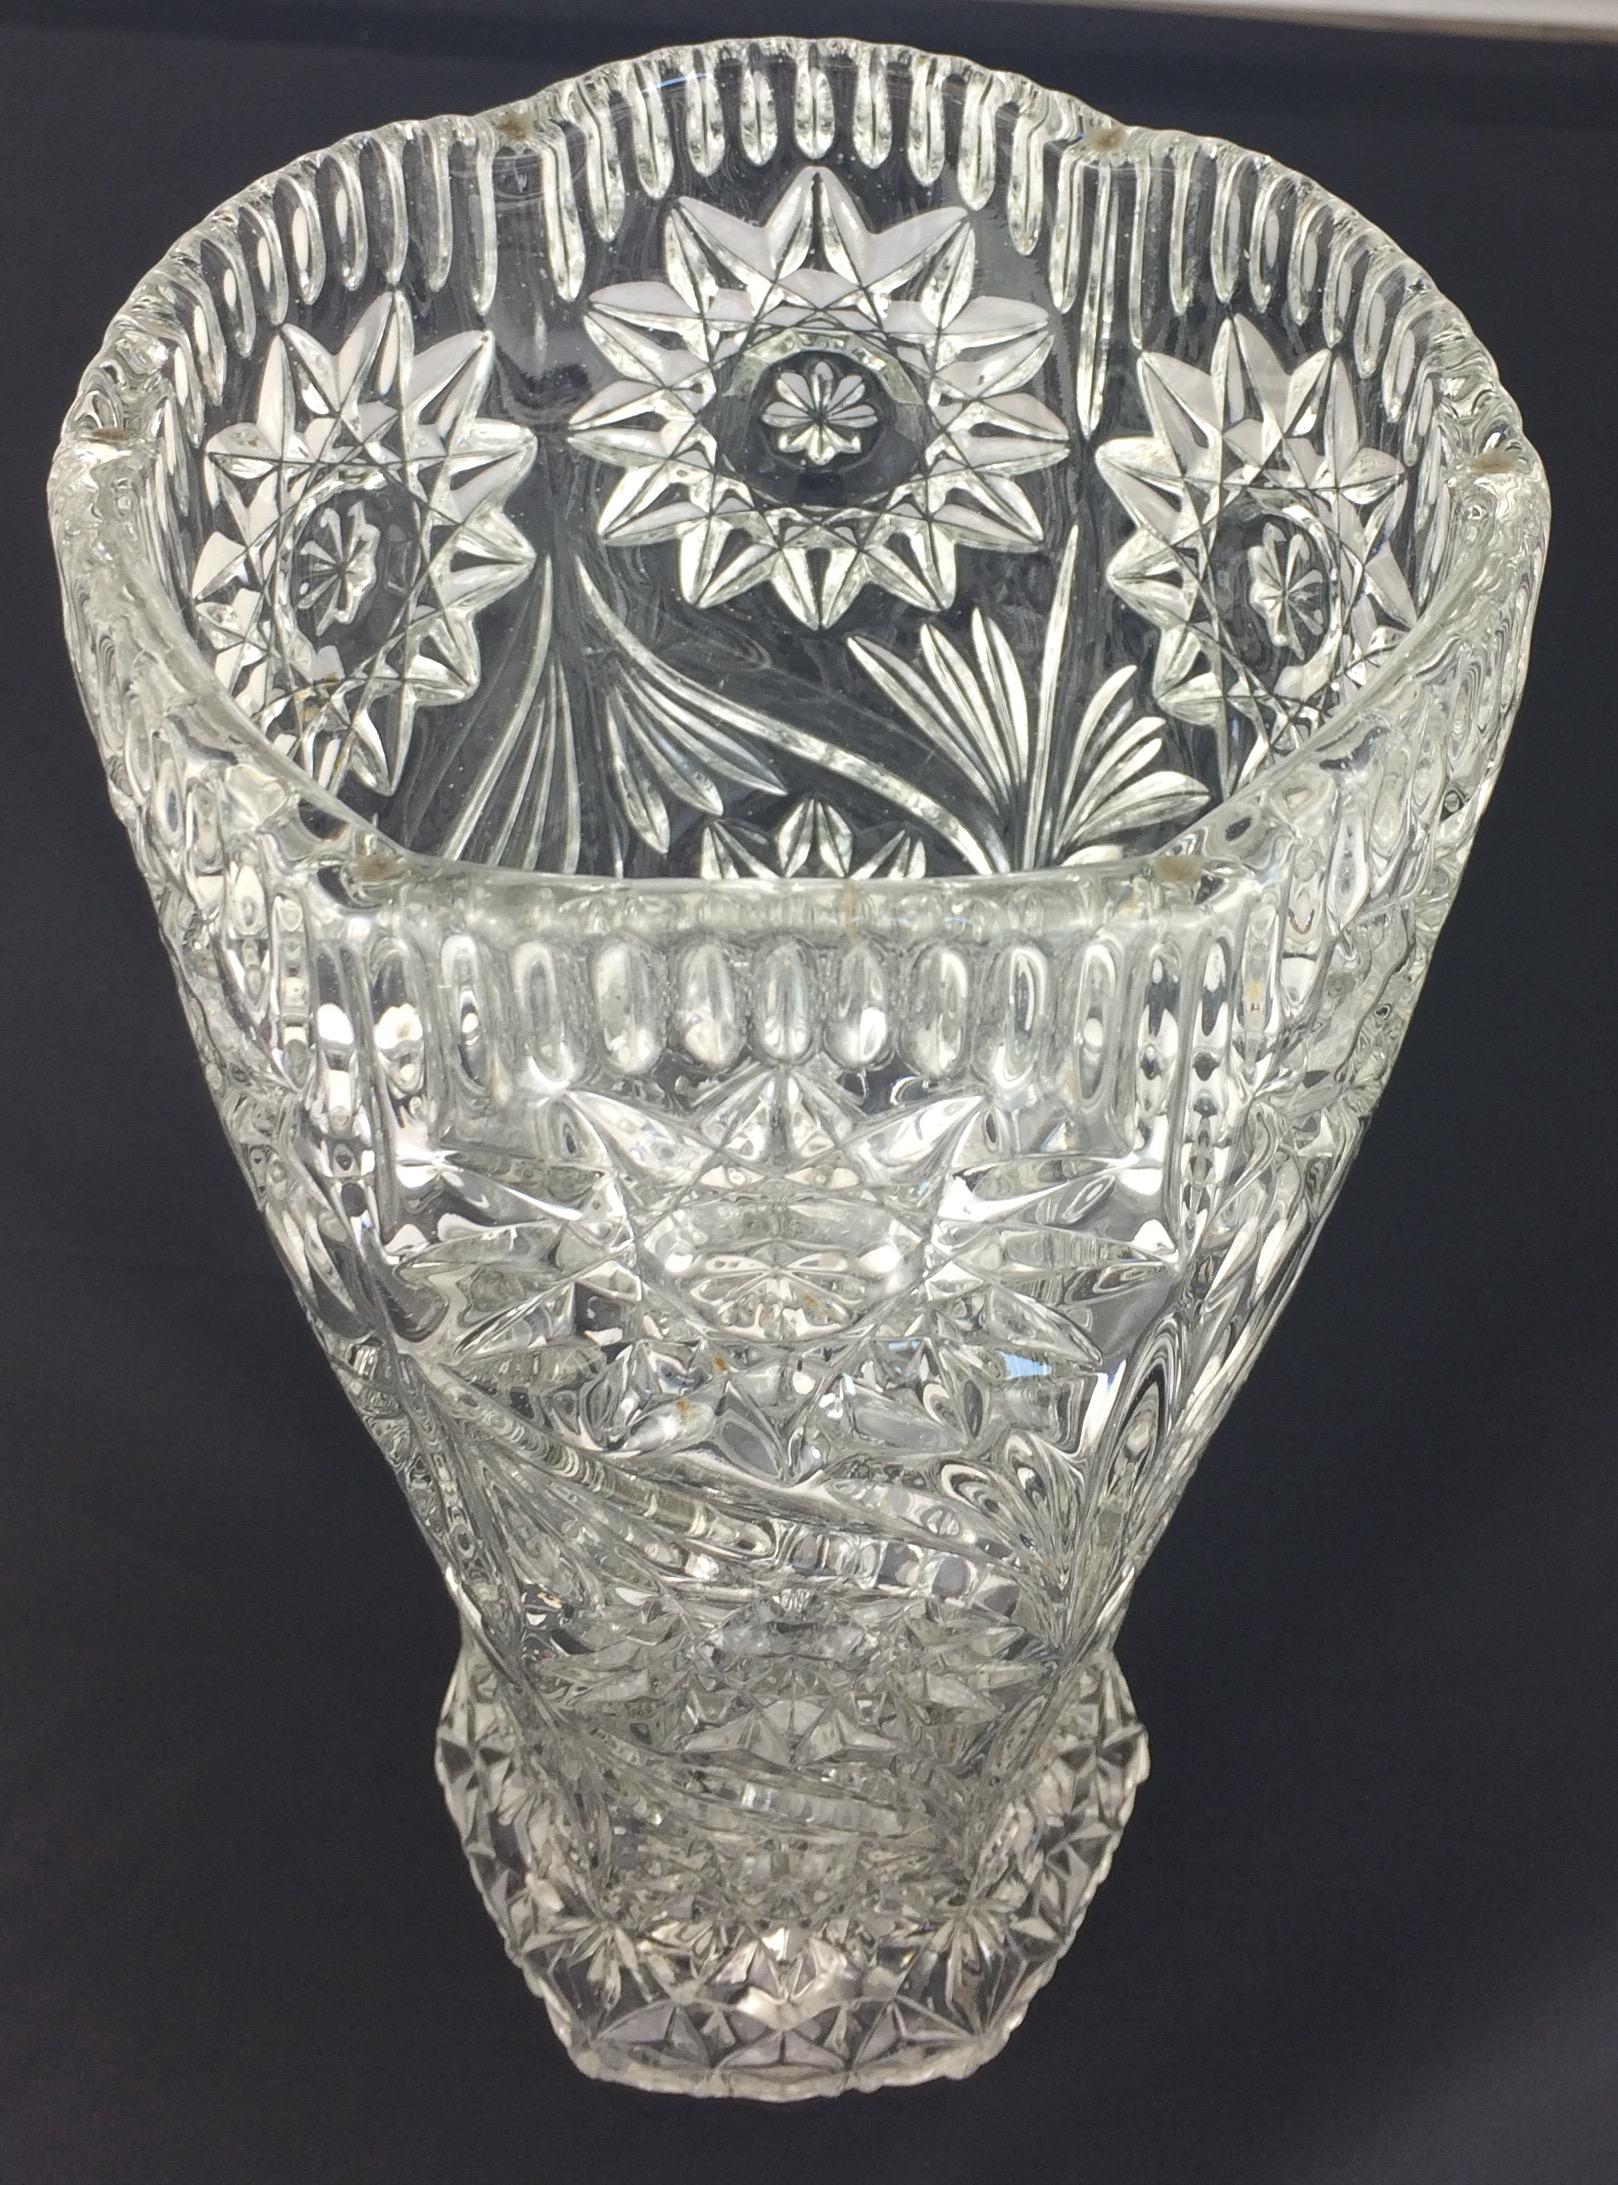 A wonderful piece made of very good quality vase. The design is typical of French art glass from the early 20th Century made by Baccarat, although, this one is not signed. 

Perfect condition. No chips nor cracks. Makes a great centerpiece and gift.